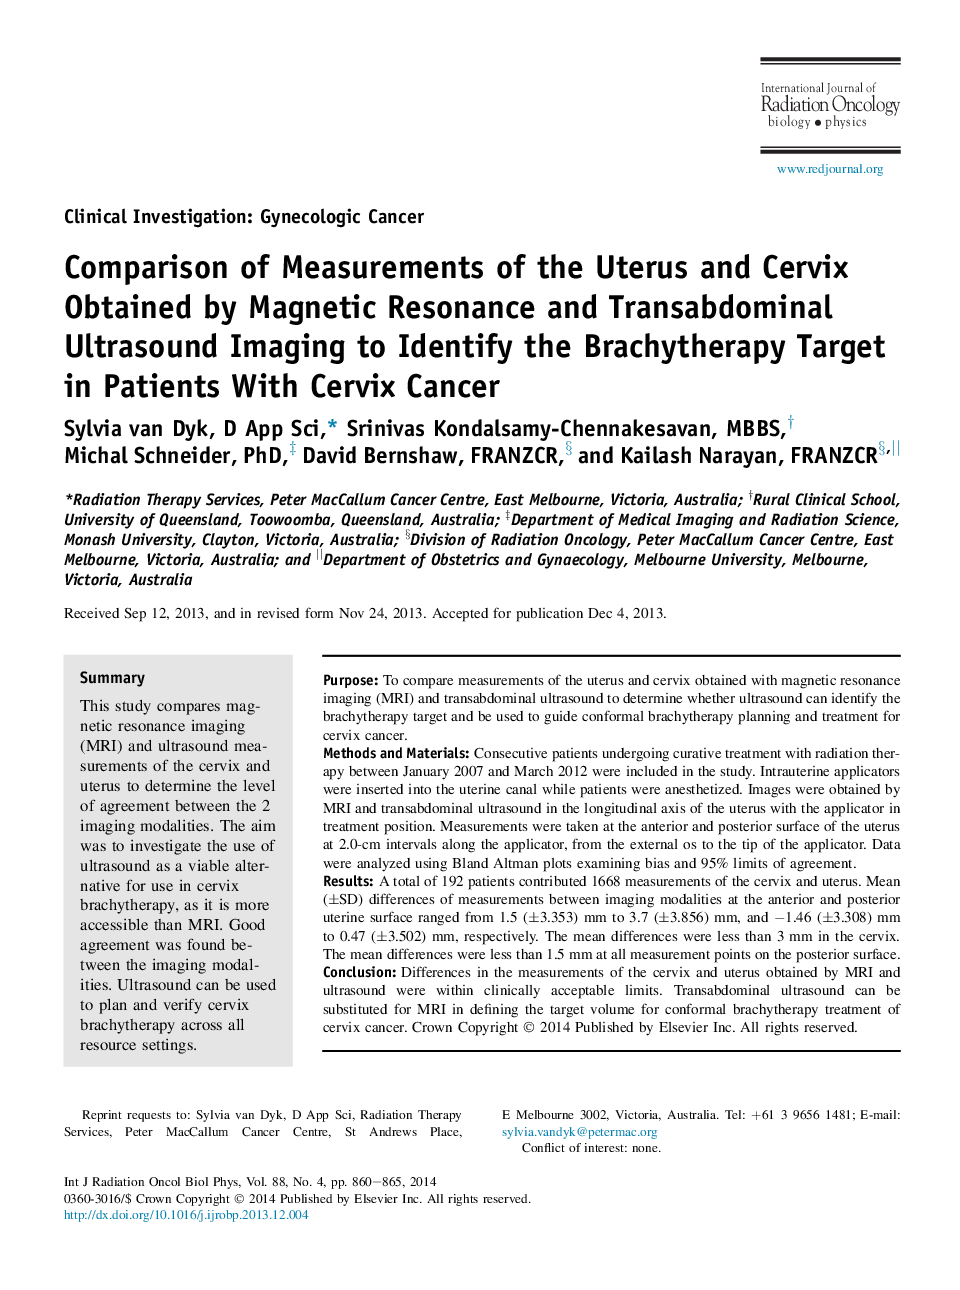 Comparison of Measurements of the Uterus and Cervix Obtained by Magnetic Resonance and Transabdominal Ultrasound Imaging to Identify the Brachytherapy Target in Patients With Cervix Cancer